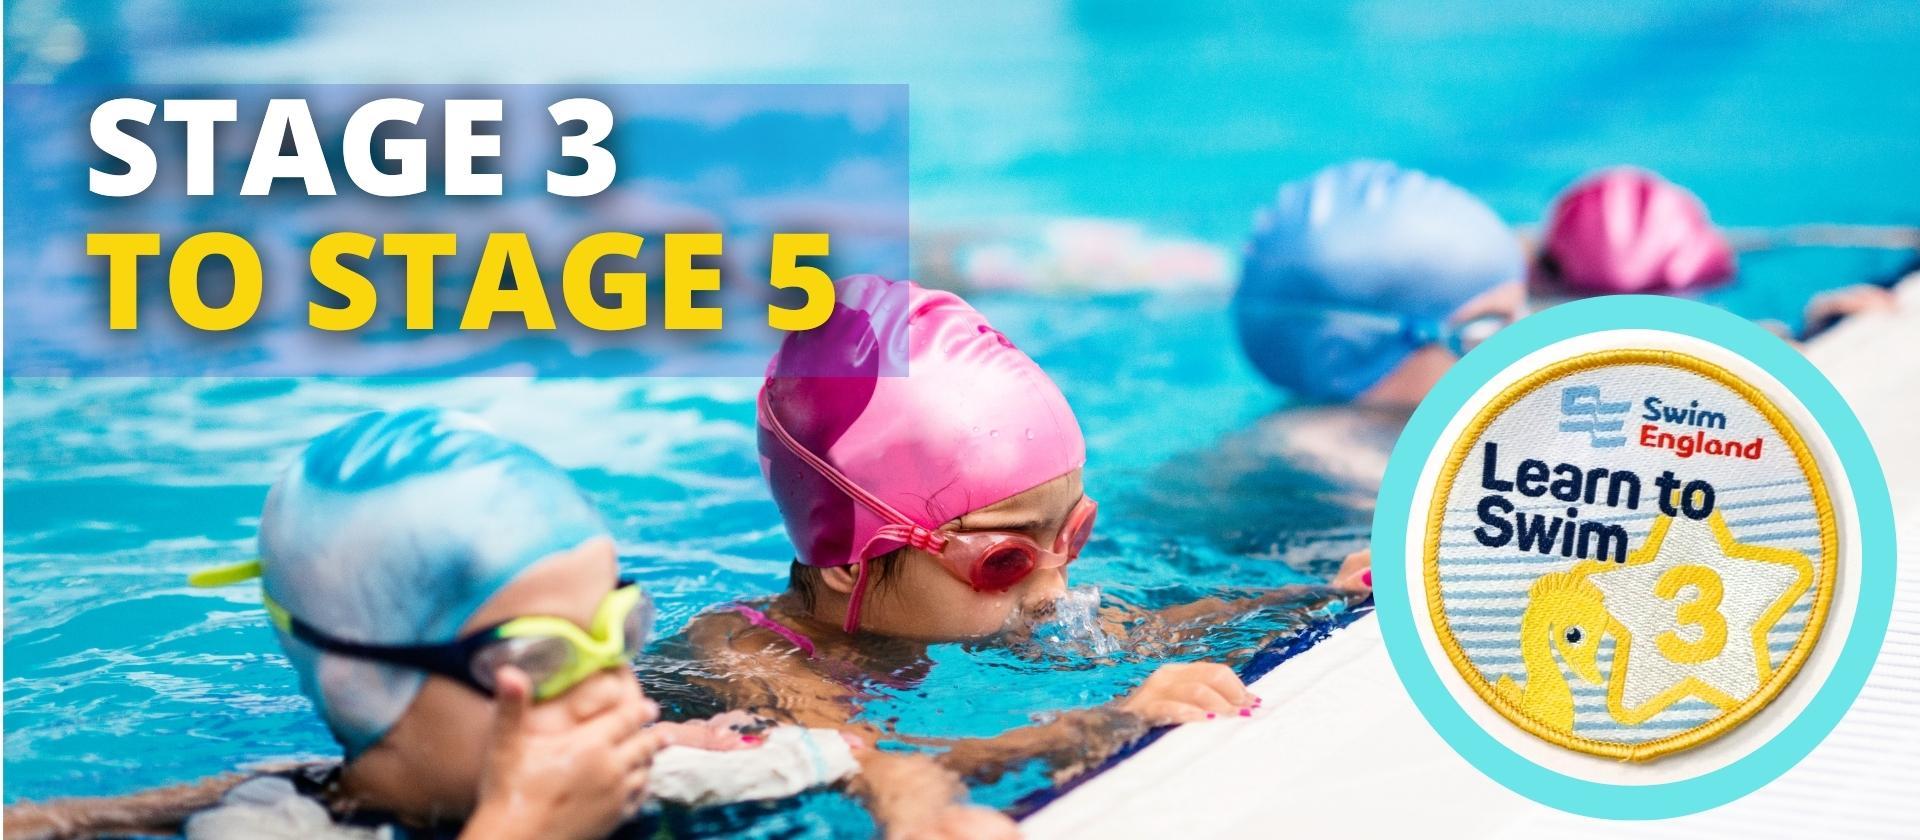 Atherstone leisure complex, swimming pools learn to swim stage 3 - 5